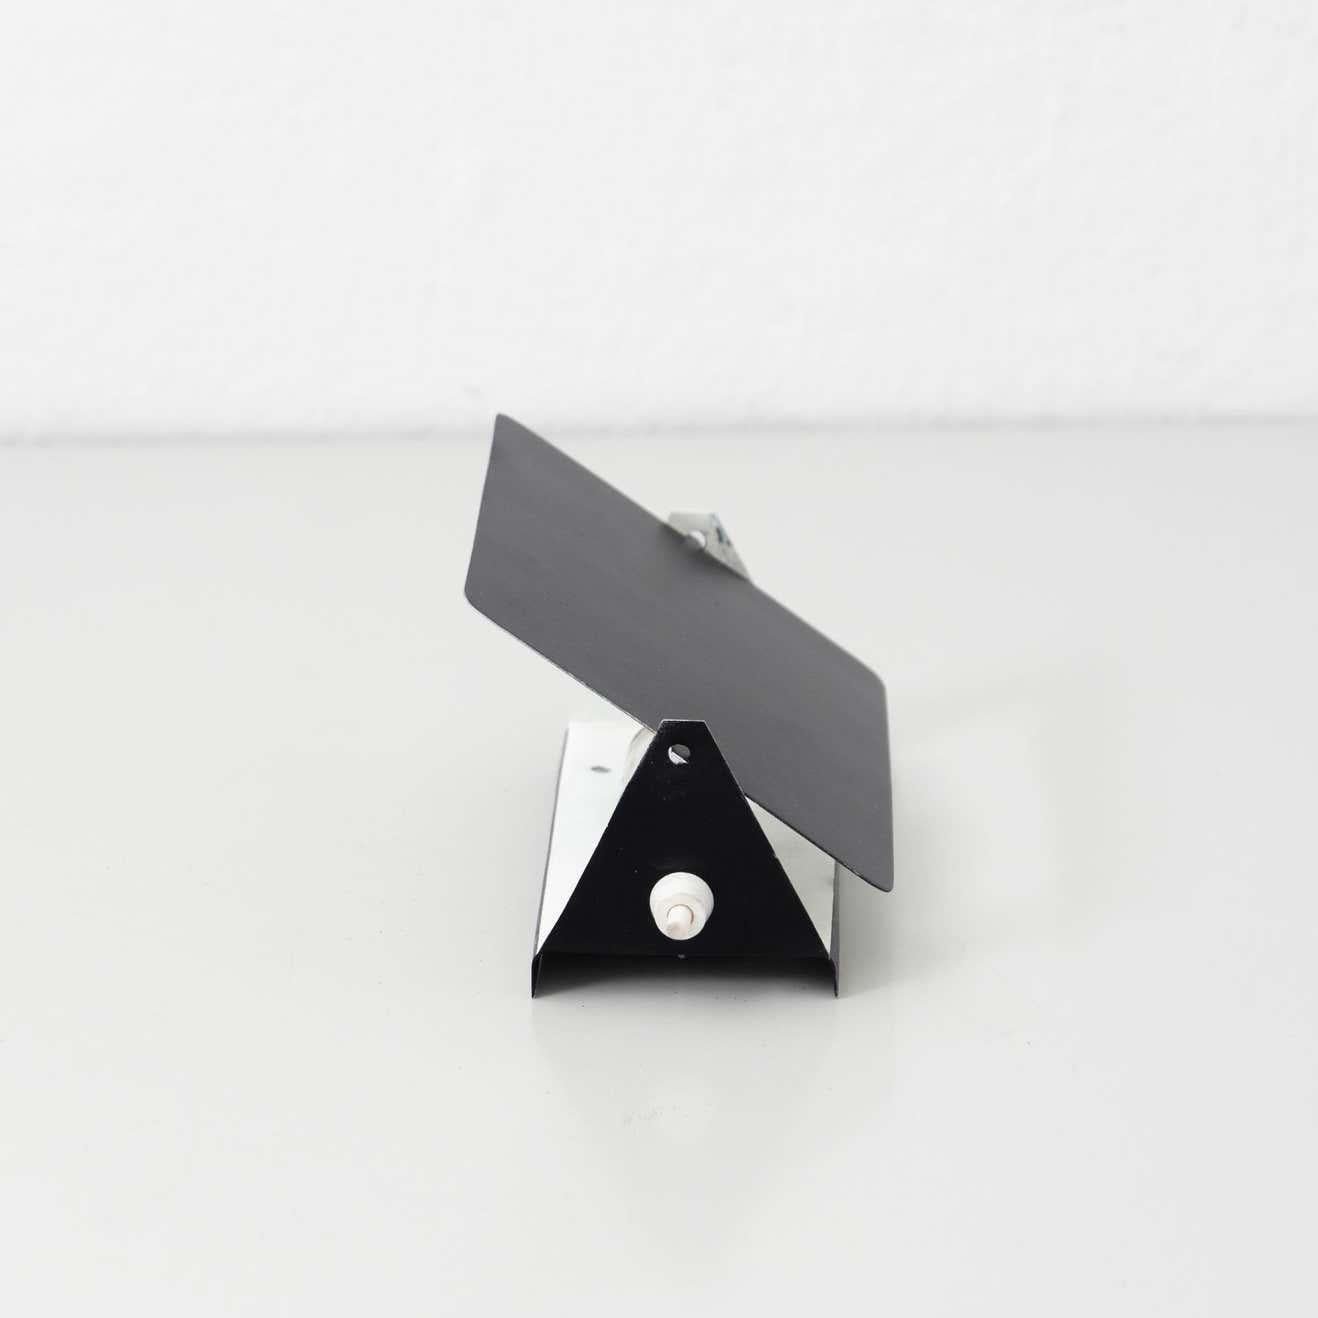 Pair of Charlotte Perriand Mid-Century Modern Black Metal Cp-1 Wall Light, 1960 For Sale 2